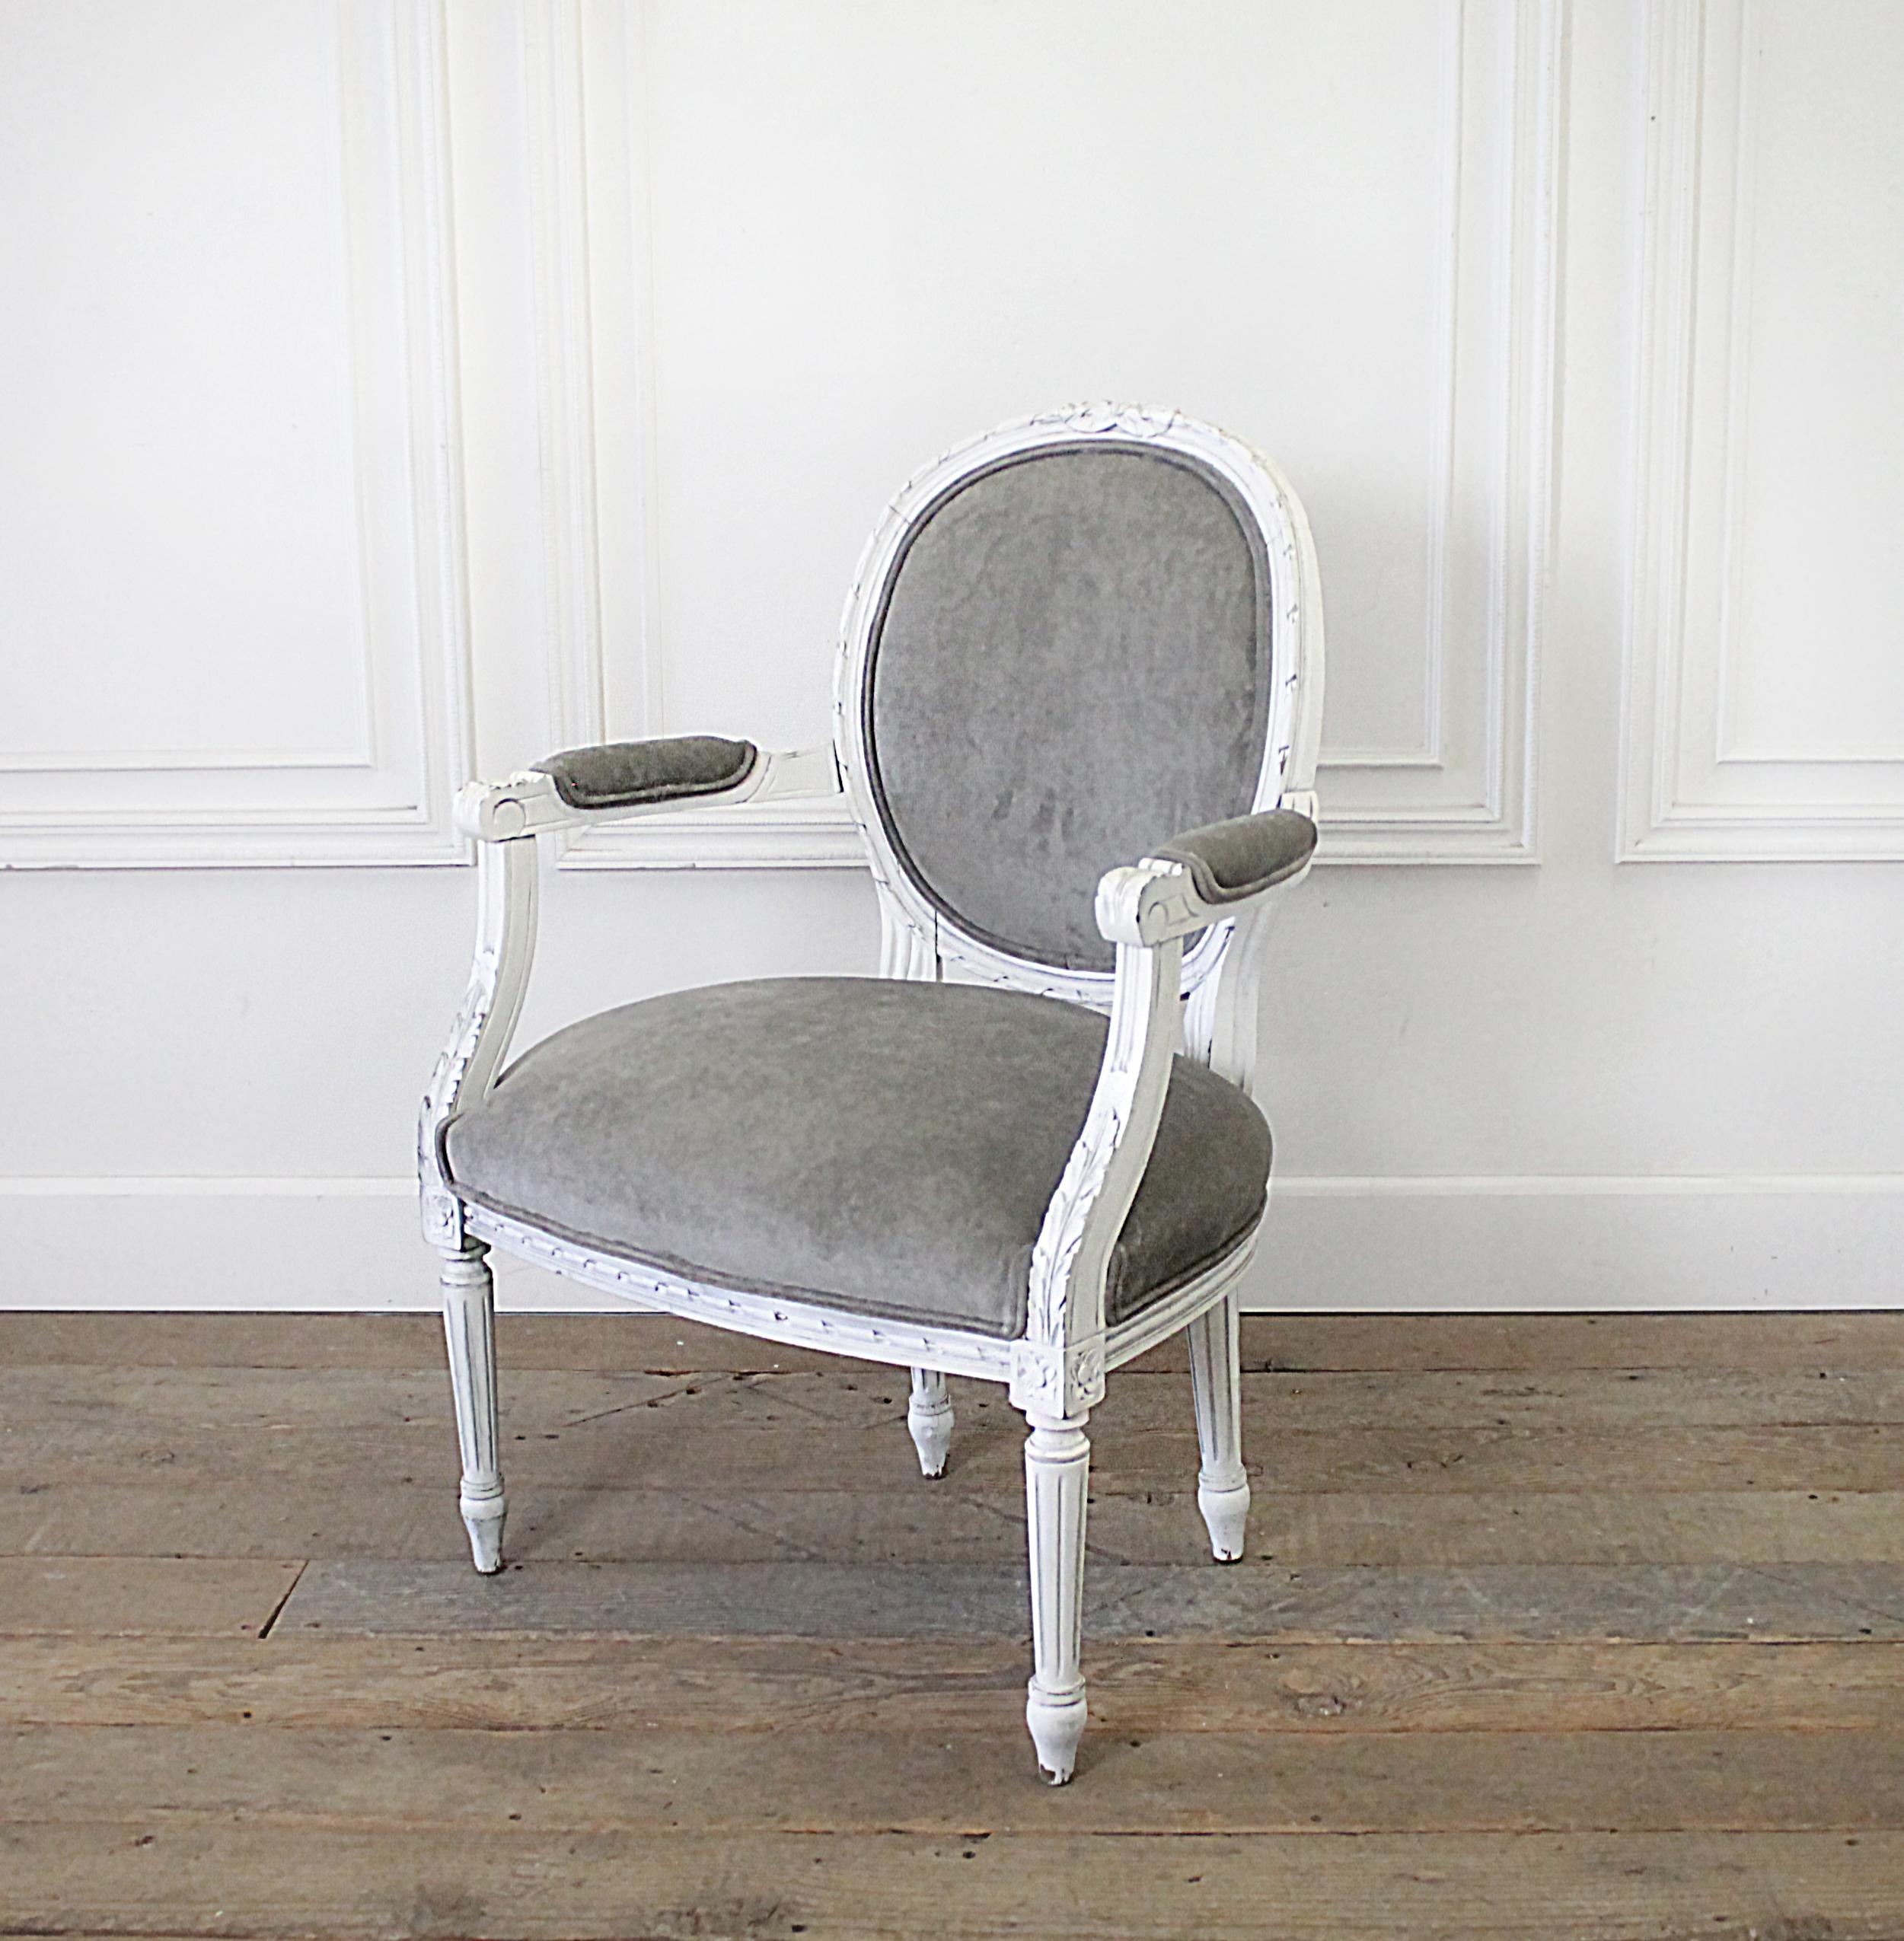 Early 20h century carved and painted French Louis XVI style open armchair
Painted in our antique white, with subtle distressed edges, and light antique glazed patina. This Louis Arm chair has been upholstered in a medium grey velvet.
Chair is